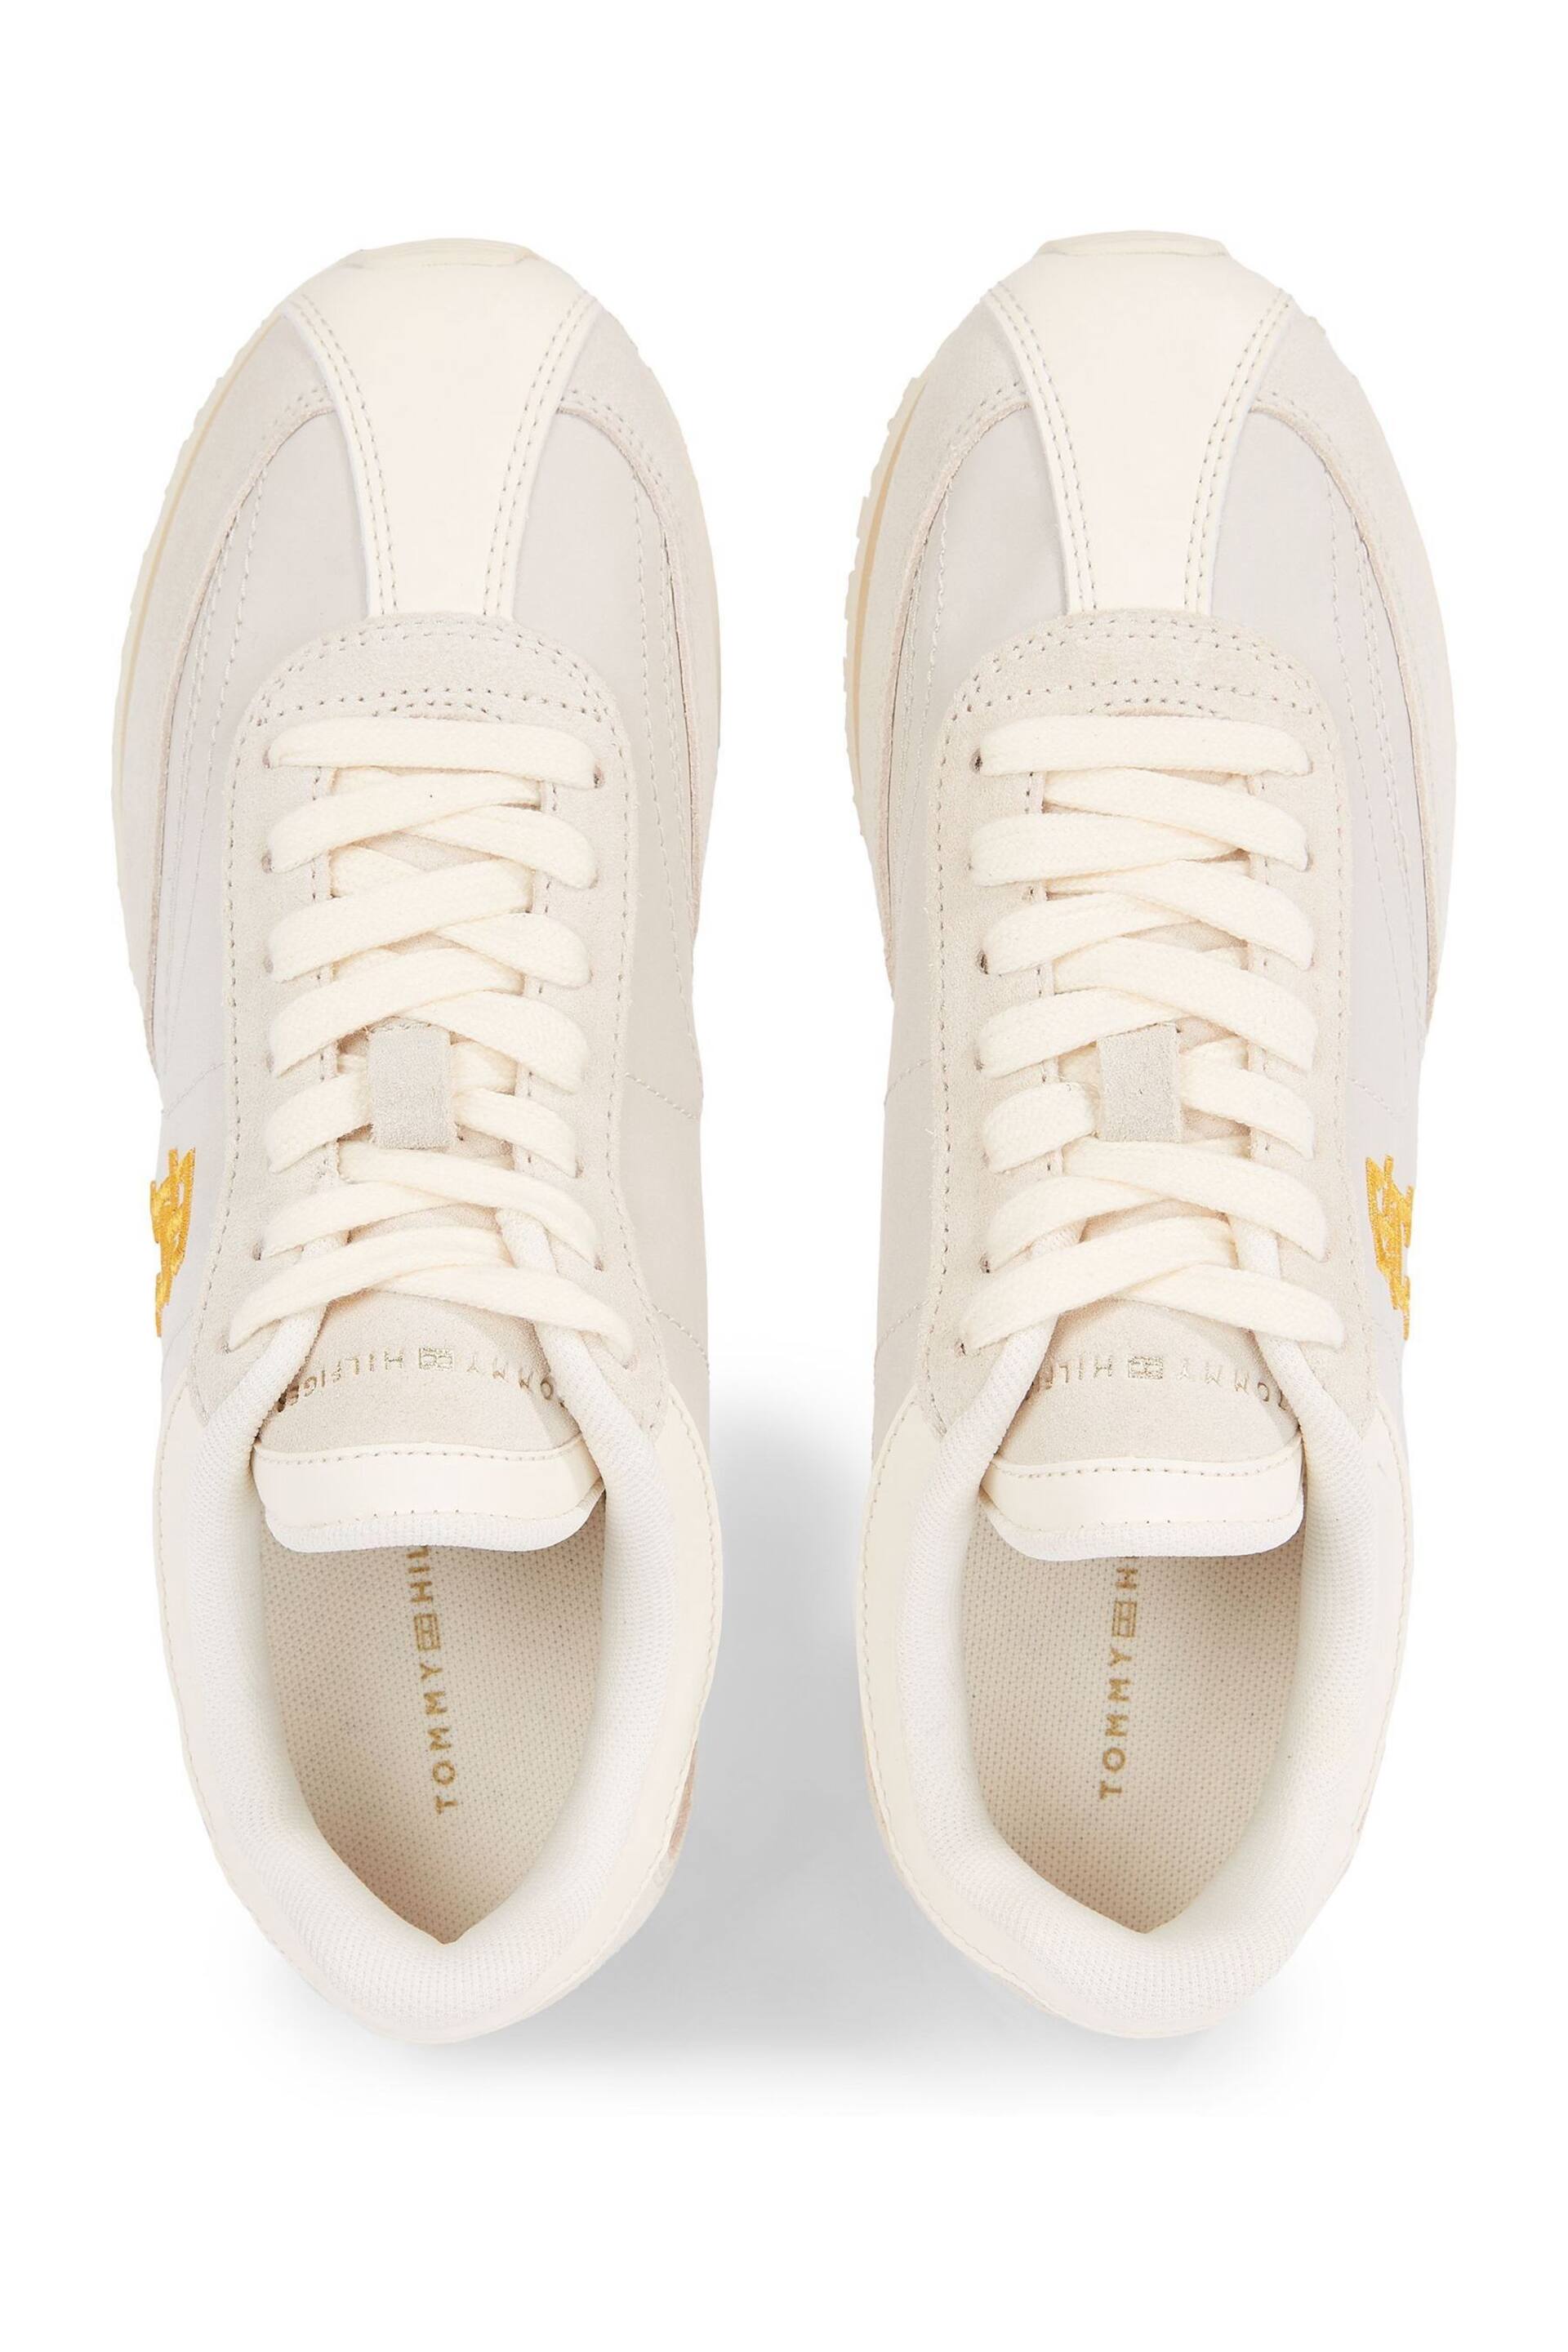 Tommy Hilfiger Cream Heritage Trainers - Image 3 of 4